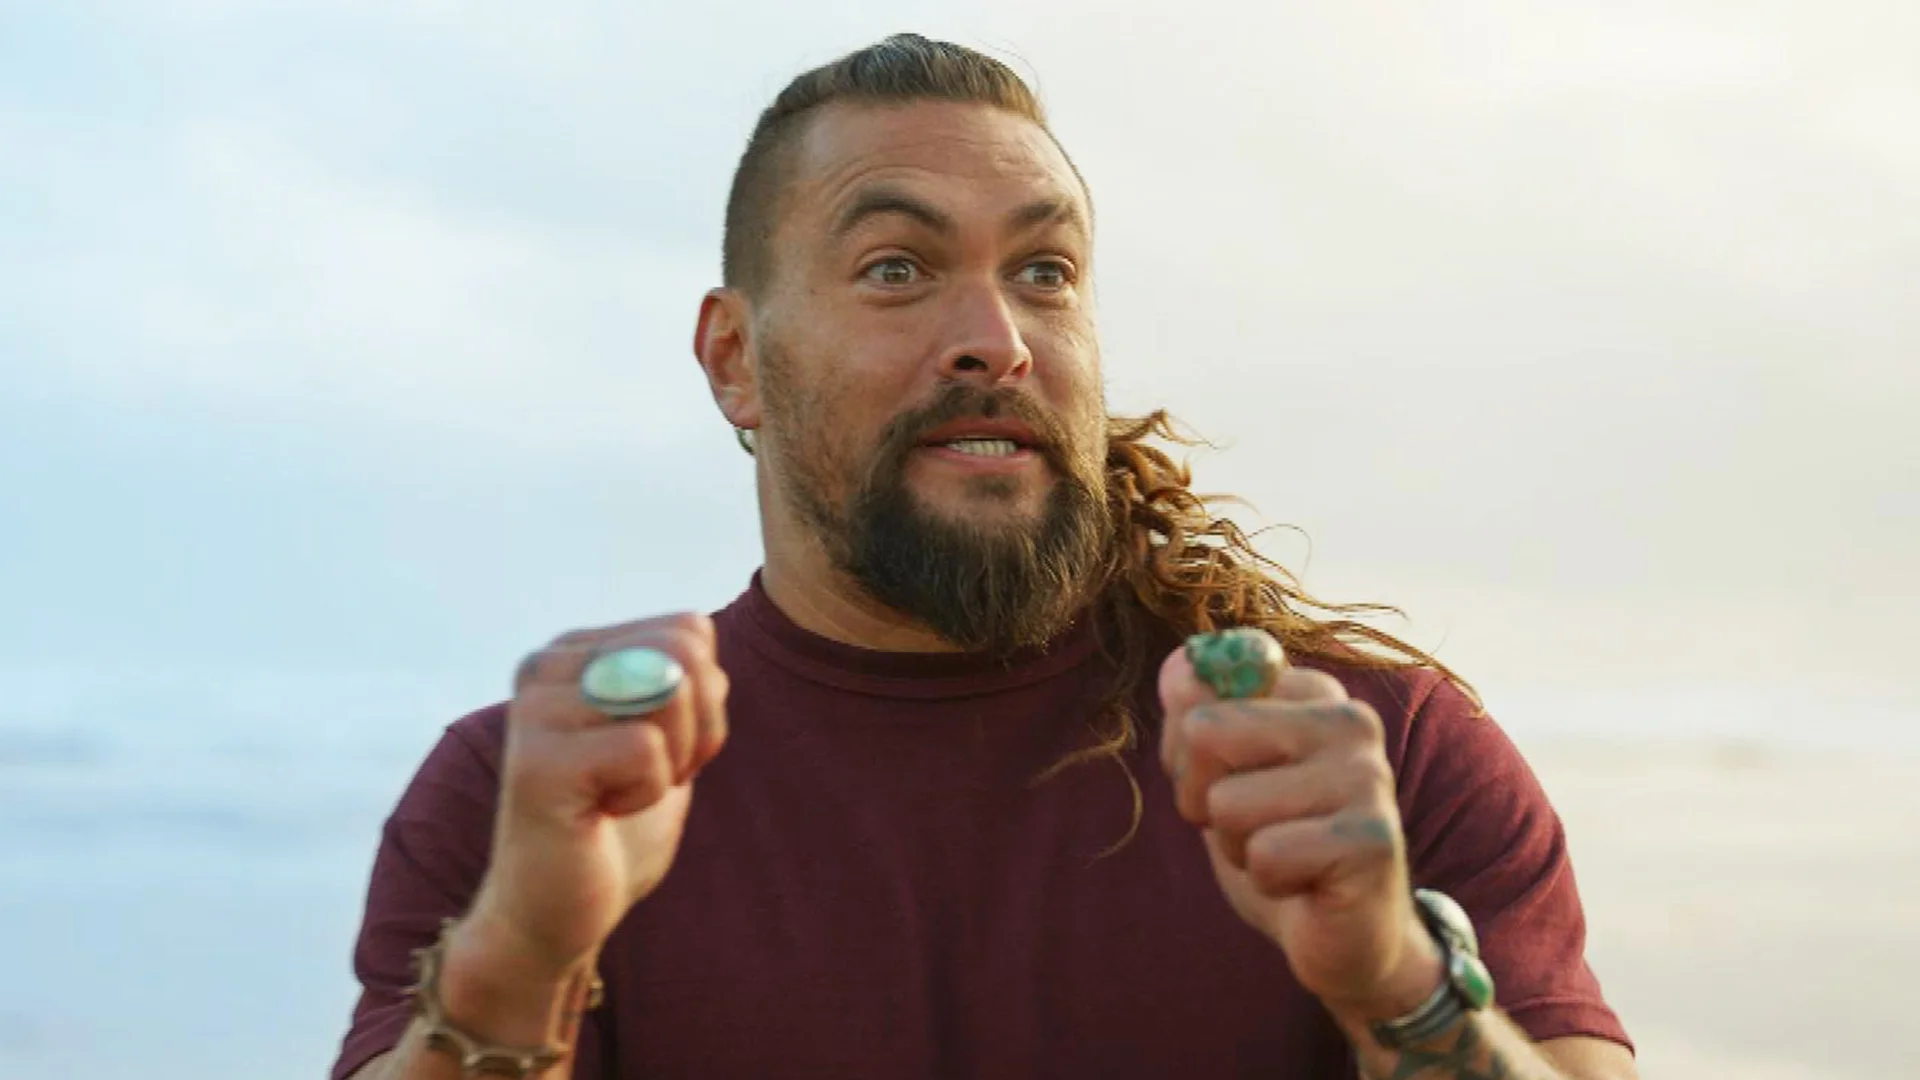 Jason Momoa to Host Discovery Channel's Shark Week Beginning Sunday, July 23 at 8PM ET/PT